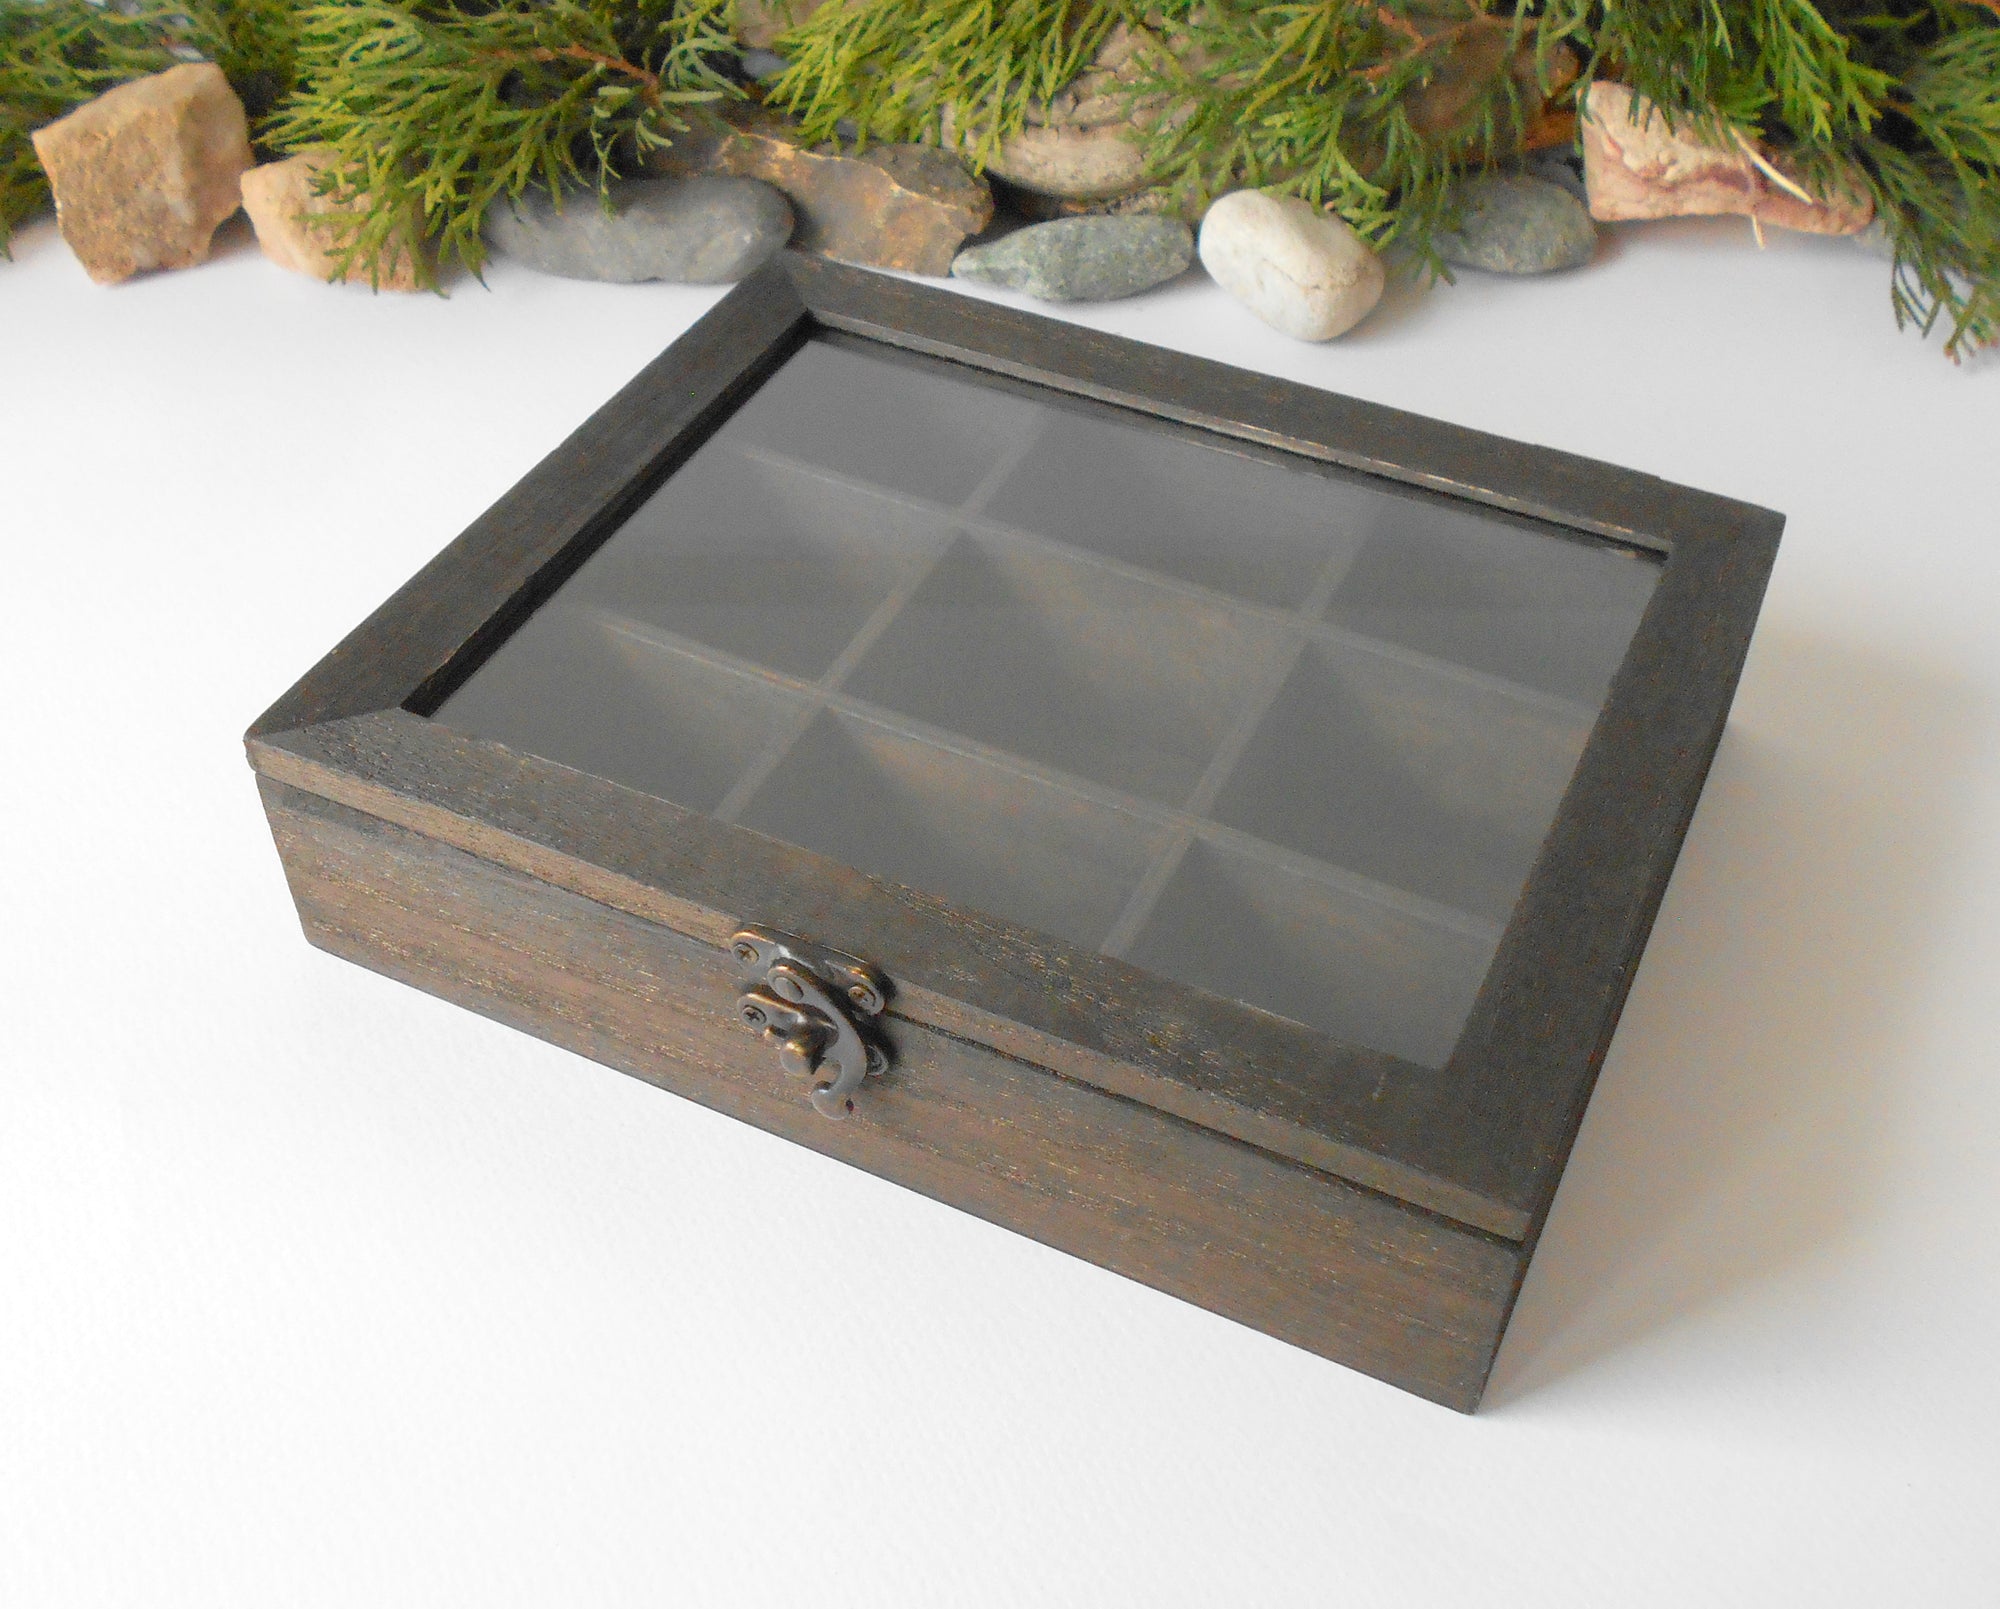 This is a wooden box with a glass display that is made of bamboo wood and that has metal hinges and closes with a bronze-color closing that may display various things like jewelry, miniatures, crystals, or other small objects of importance to you or your friends. <span data-mce-fragment="1">I have colored the box with mordant so that it looks like an old wood vintage box with a dark brown color.</span>